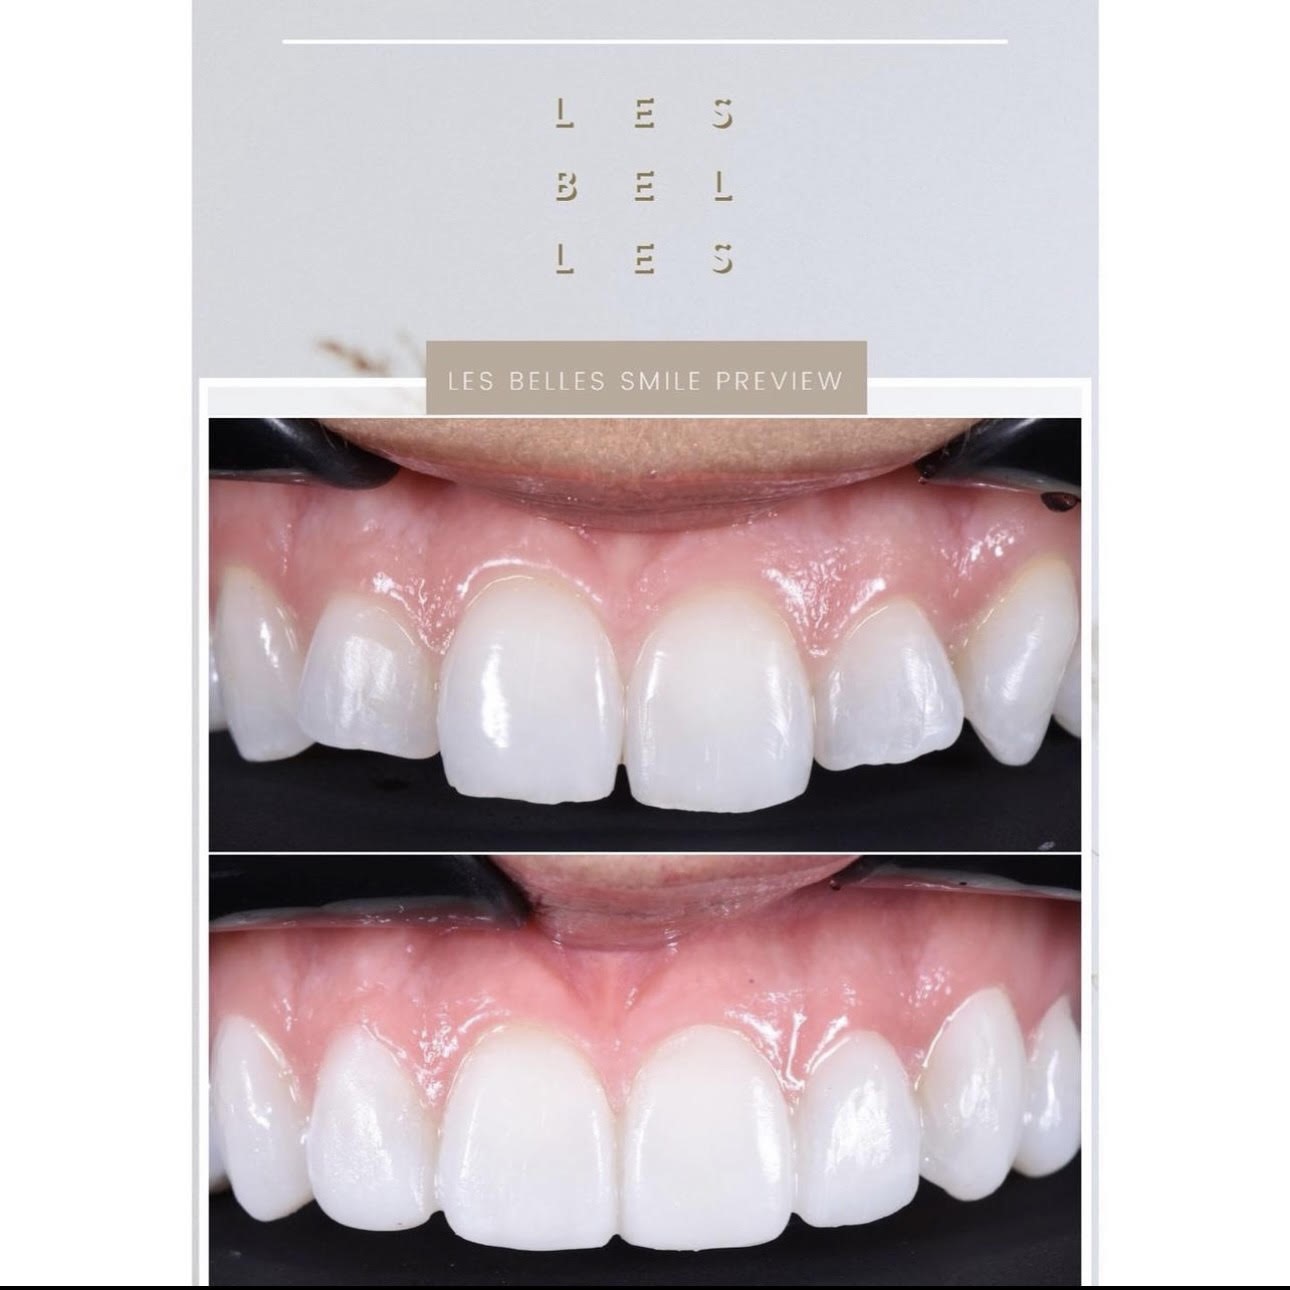 Teeth before and after Les Belles Smile Preview